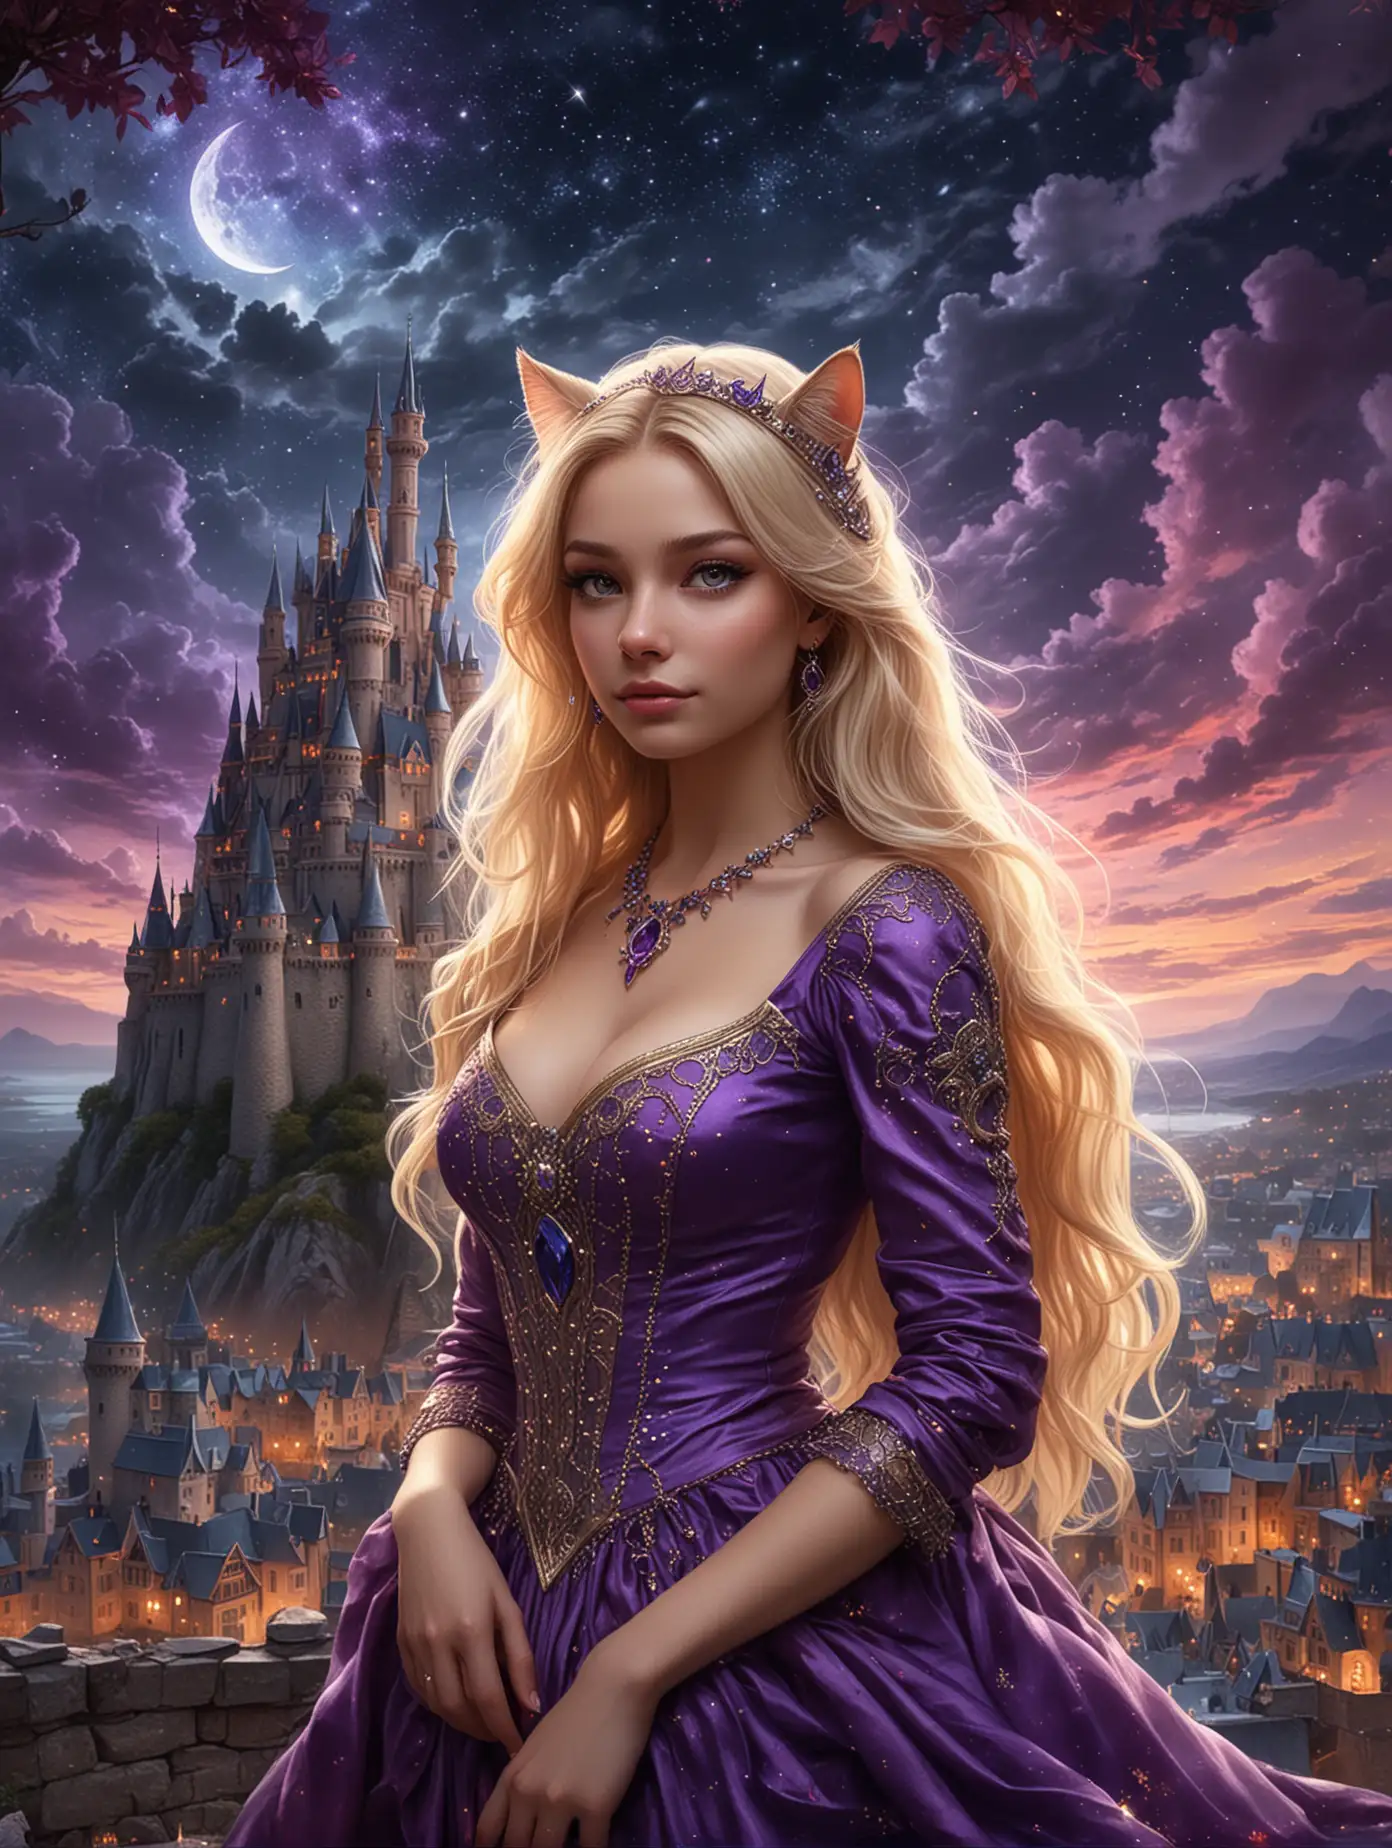 Create an image similar to the provided one, featuring a fantasy setting with a group of five characters. The central figure is a beautiful woman with long blonde hair, wearing a lavish purple dress adorned with jewels. She has a regal and confident demeanor. Surrounding her are four handsome men, each with a distinct appearance and dressed in various adventurous and rugged outfits. The background includes a fantastical night sky with stars and moons, and a castle-like cityscape with glowing lights. Add a mystical, colorful cat at the bottom right of the image, adding to the magical atmosphere.